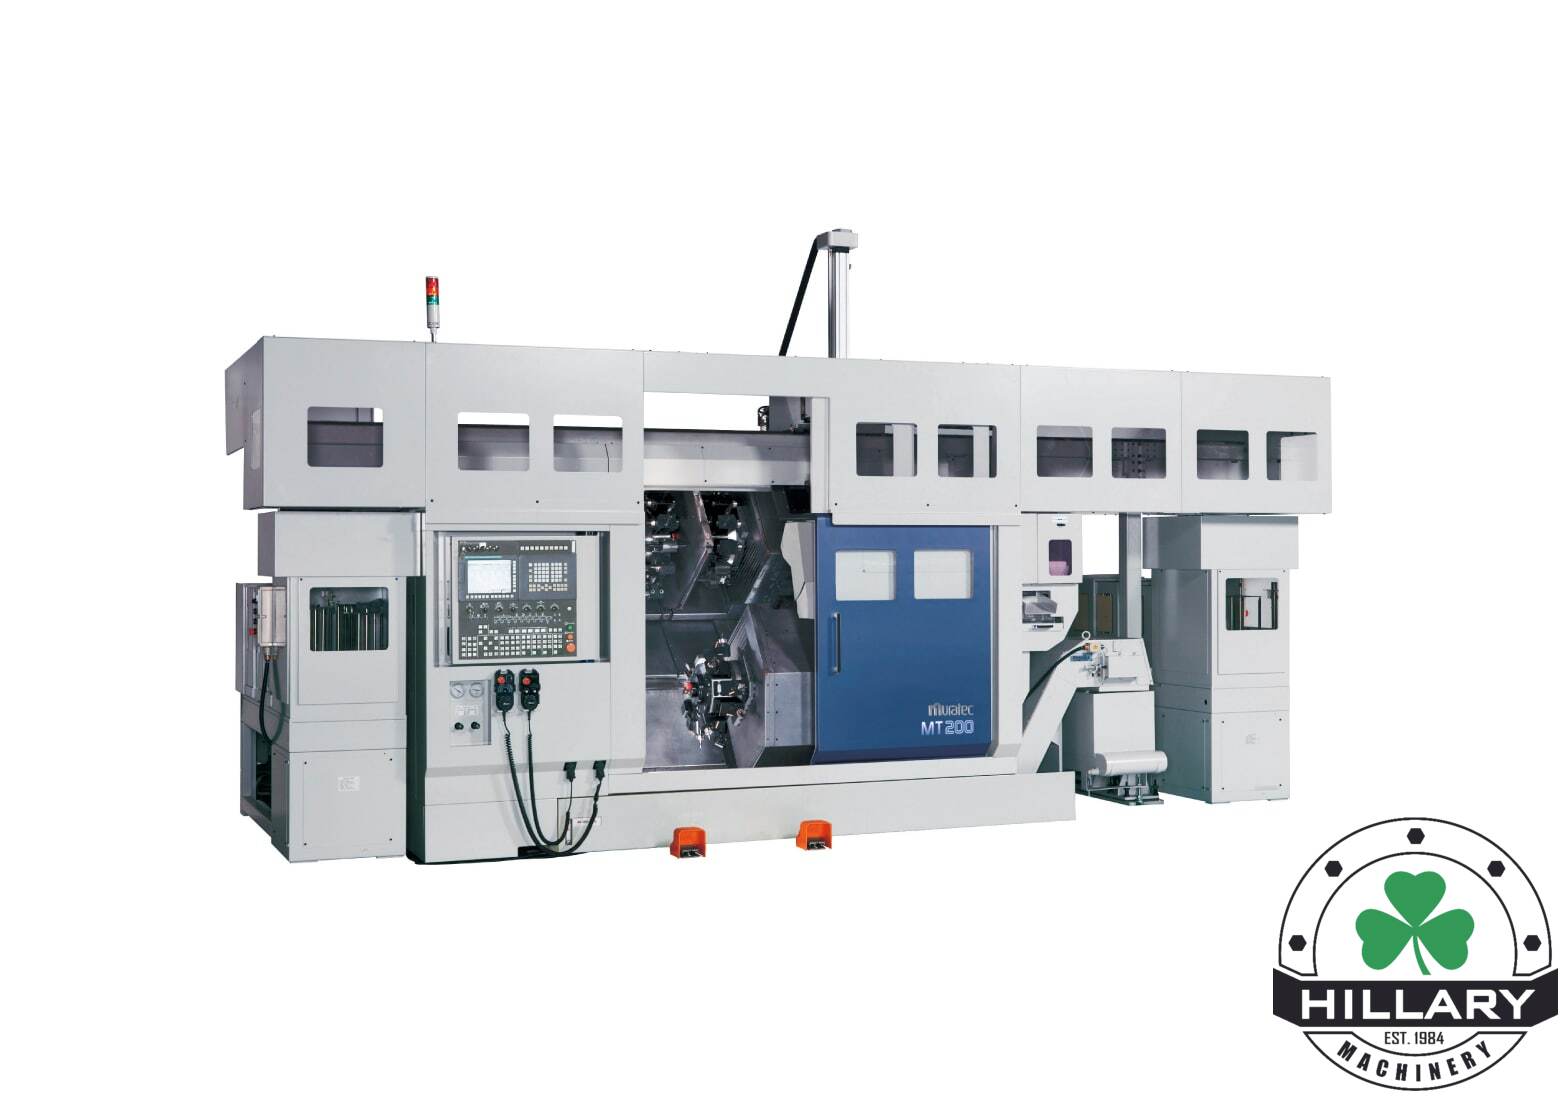 MURATEC MT200 Automated Turning Centers | Hillary Machinery